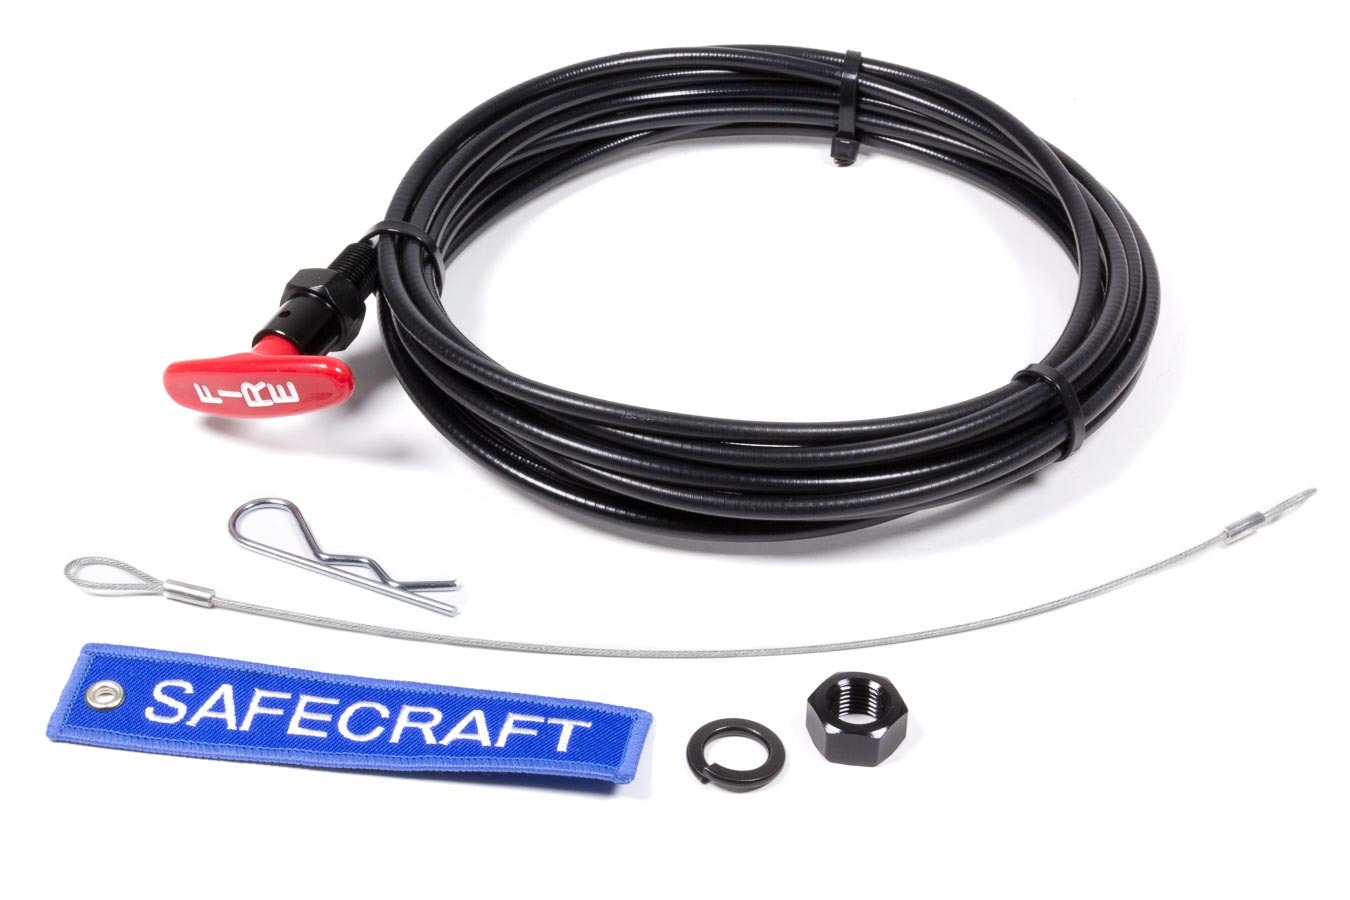 Safecraft 56-1421 - Fire Suppression Pull Cable, 15 ft Long, Handle Included, Kit